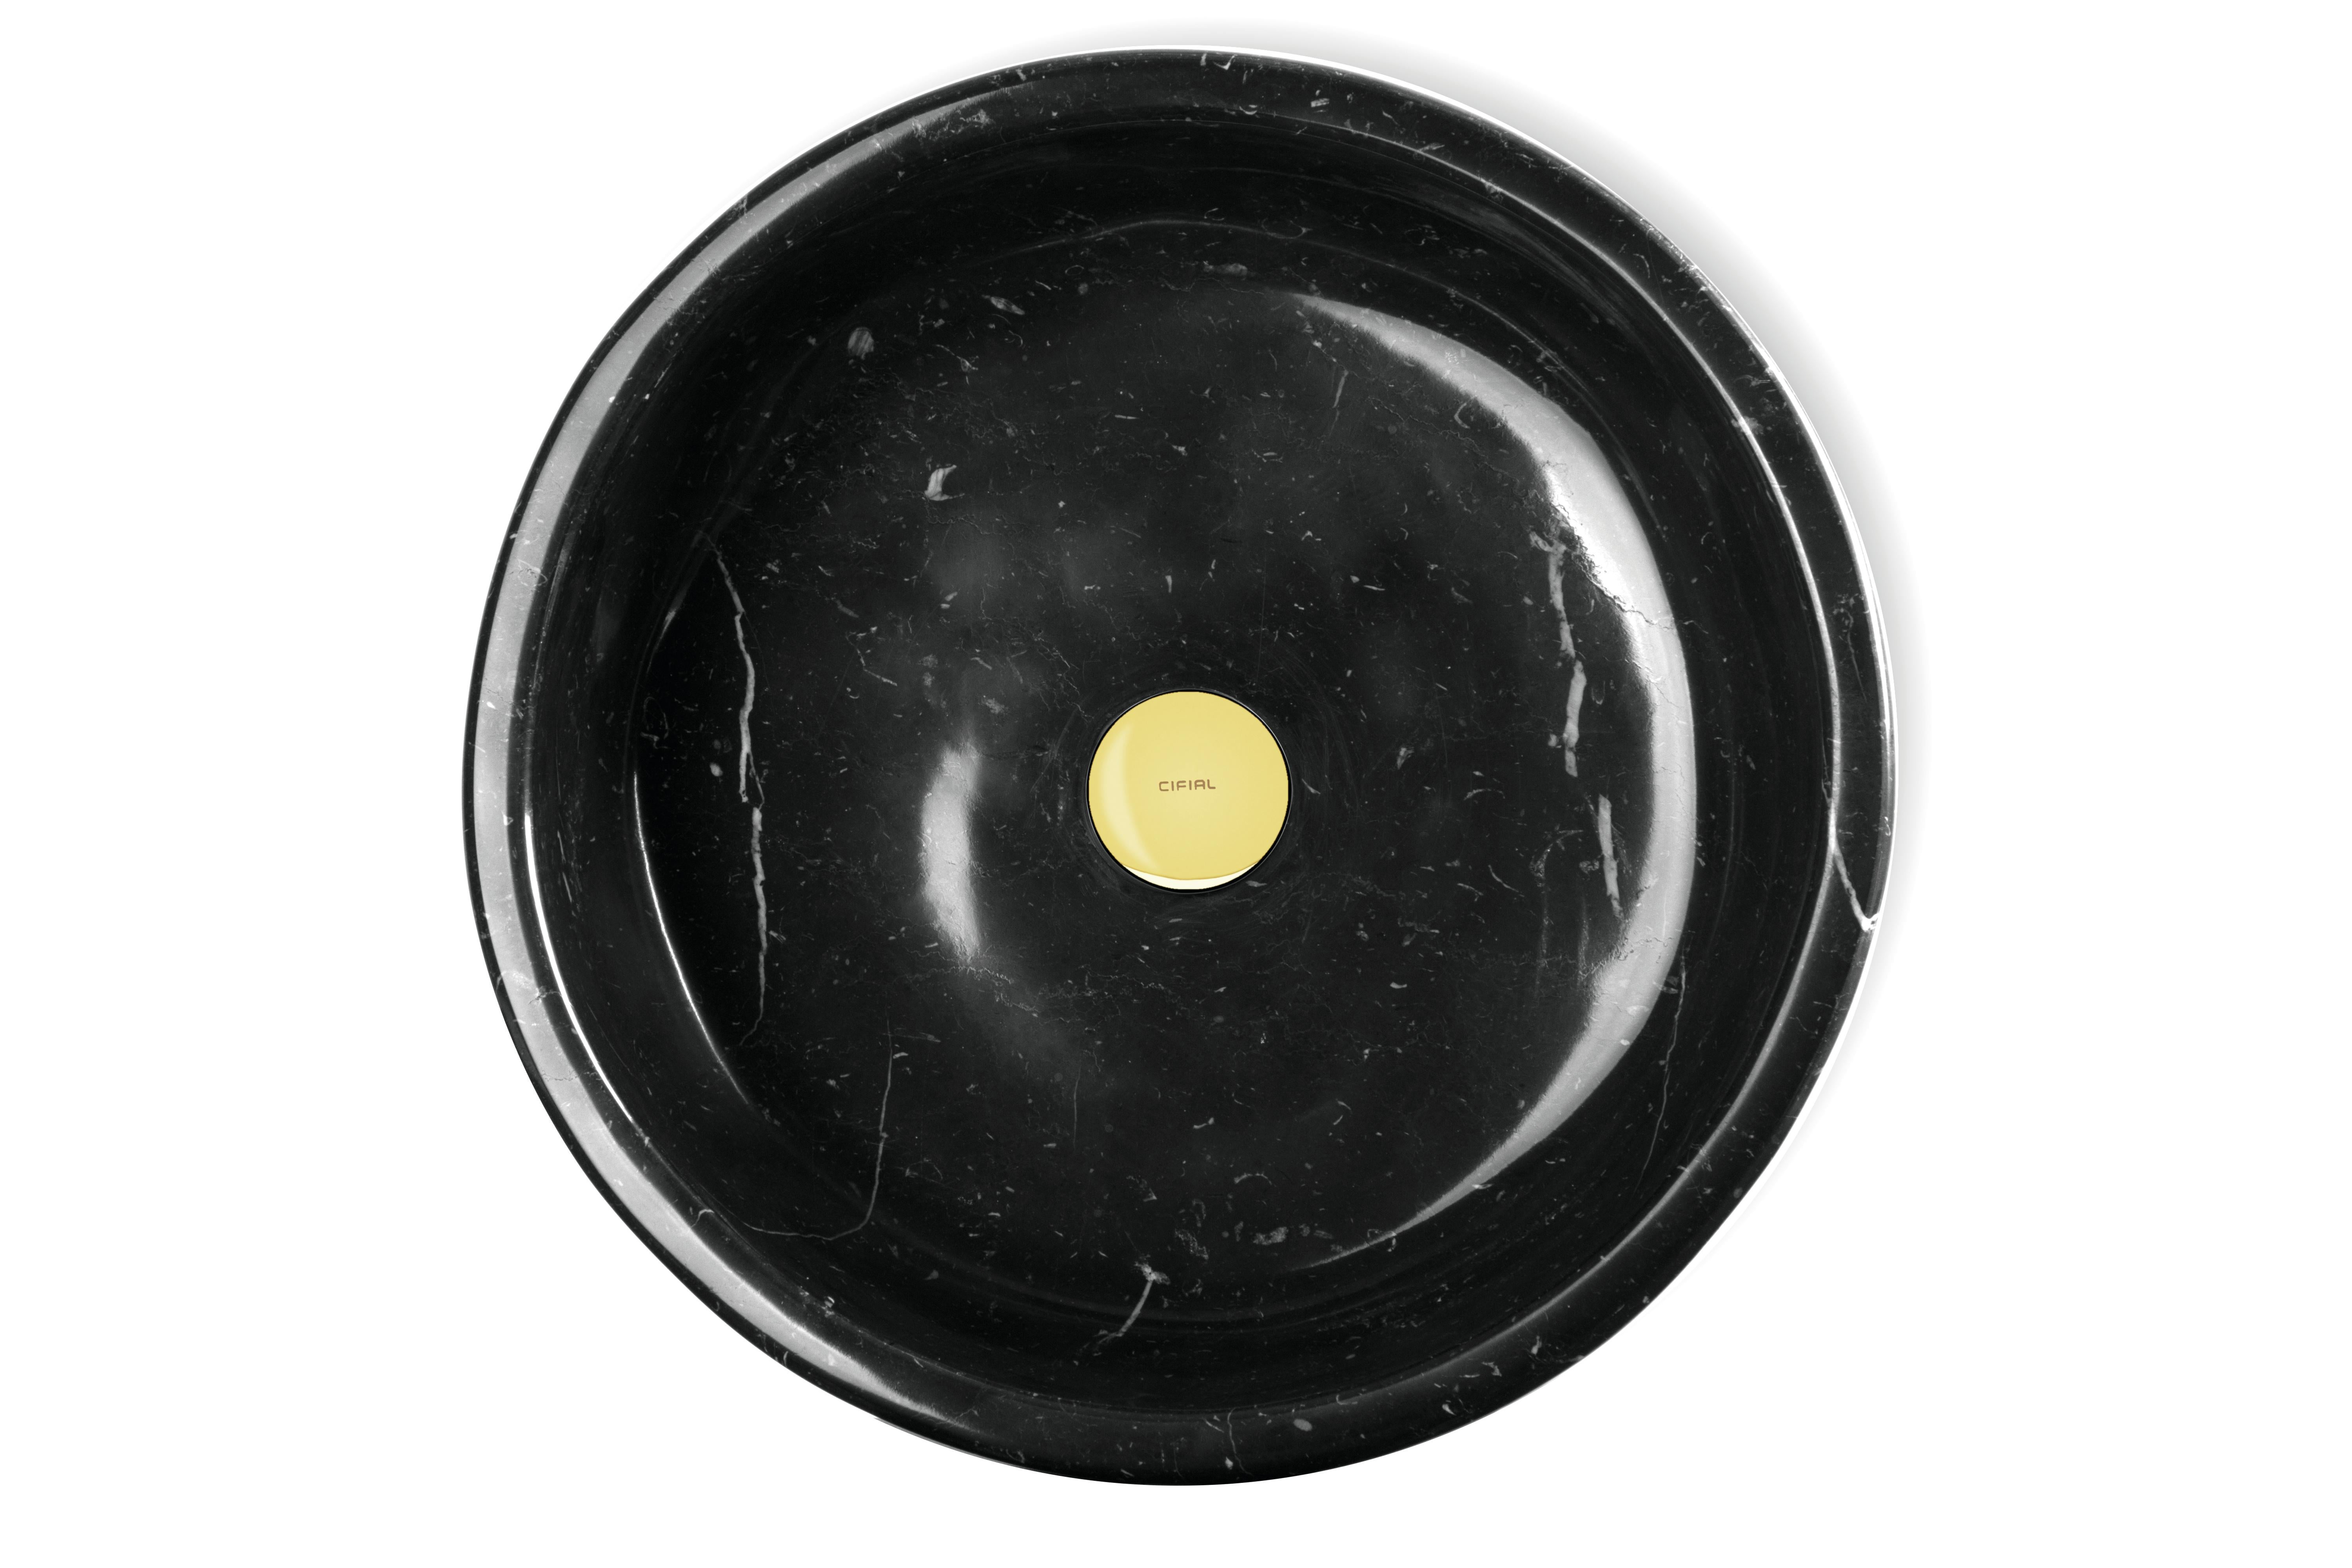 The Koi round vessel sink is available in Nero Marquina, Carrara and Estremoz marble. Its round shape makes it easy to match with any base or tap. Its versatility provides endless possibilities to create the perfect project and adorn any bathroom